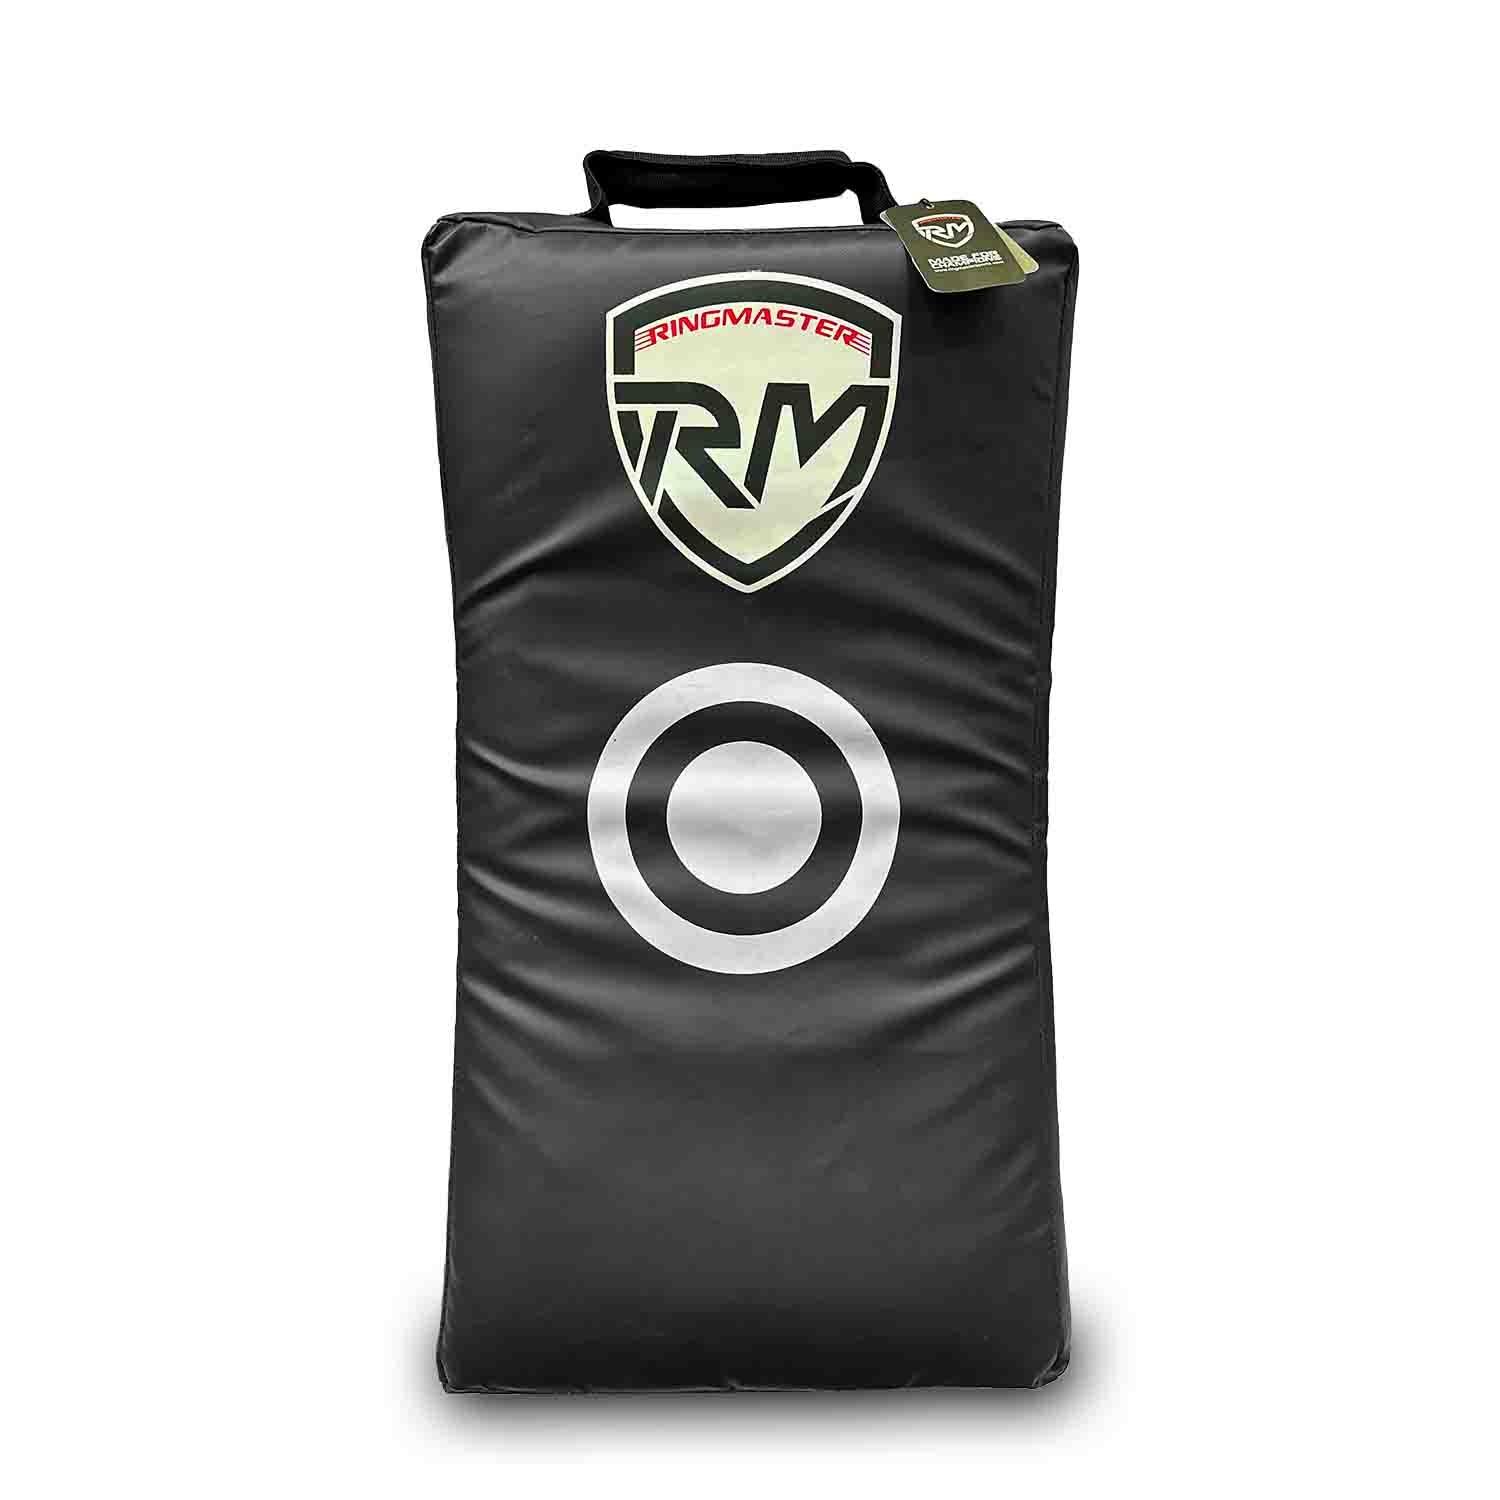 RingMaster Sports Curved Kick Shield - RINGMASTER SPORTS - Made For Champions